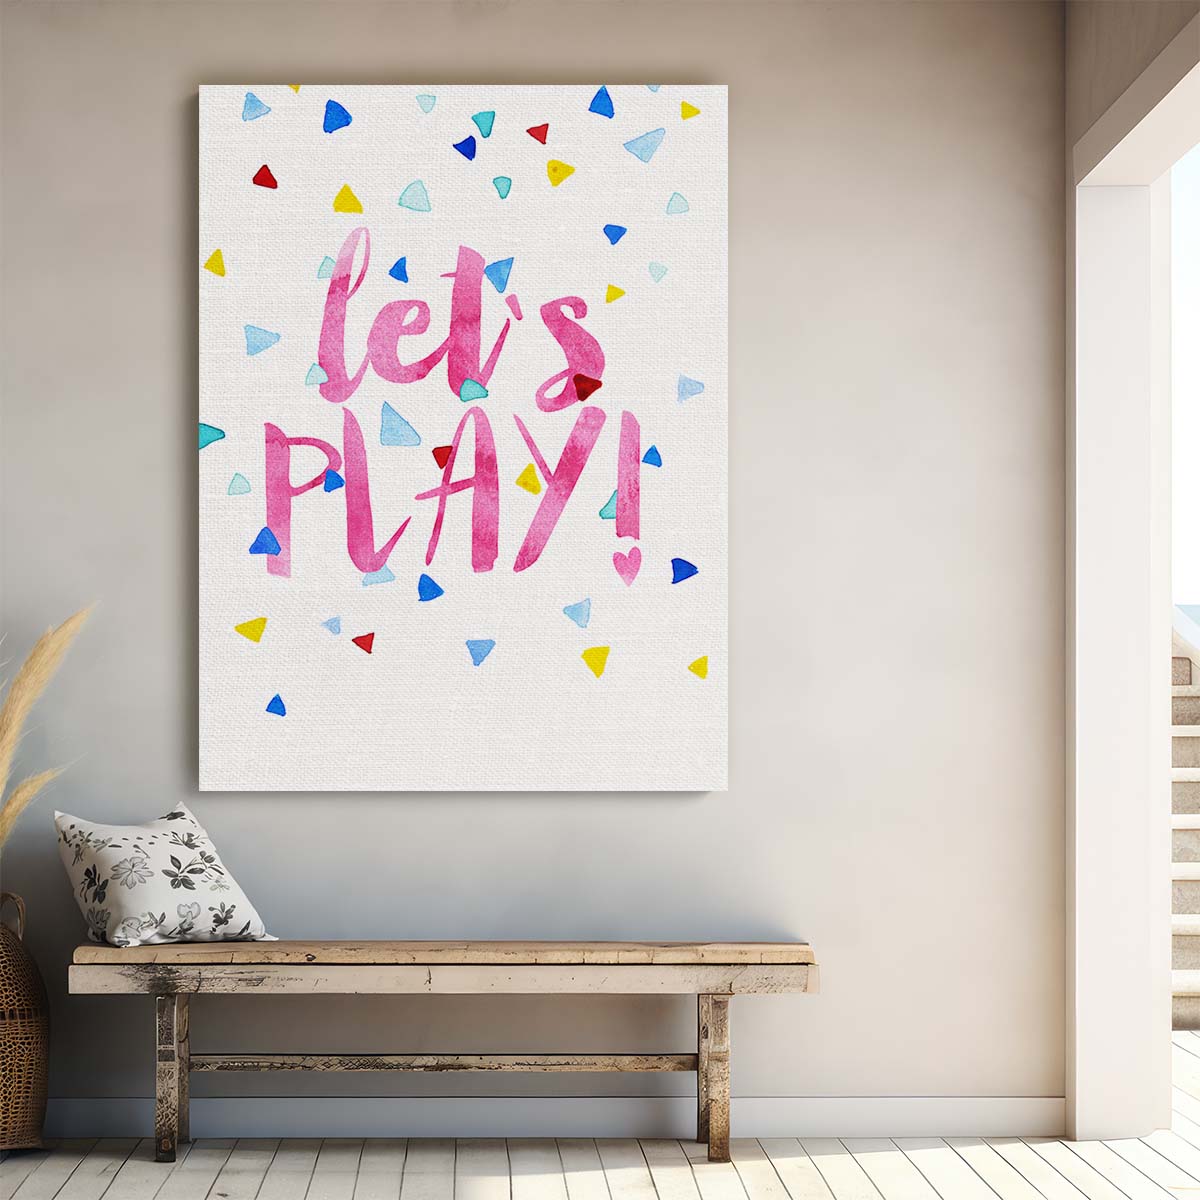 Colorful, Inspirational Kids Room Wall Art - 'Let's Play!' by Treechild by Luxuriance Designs, made in USA